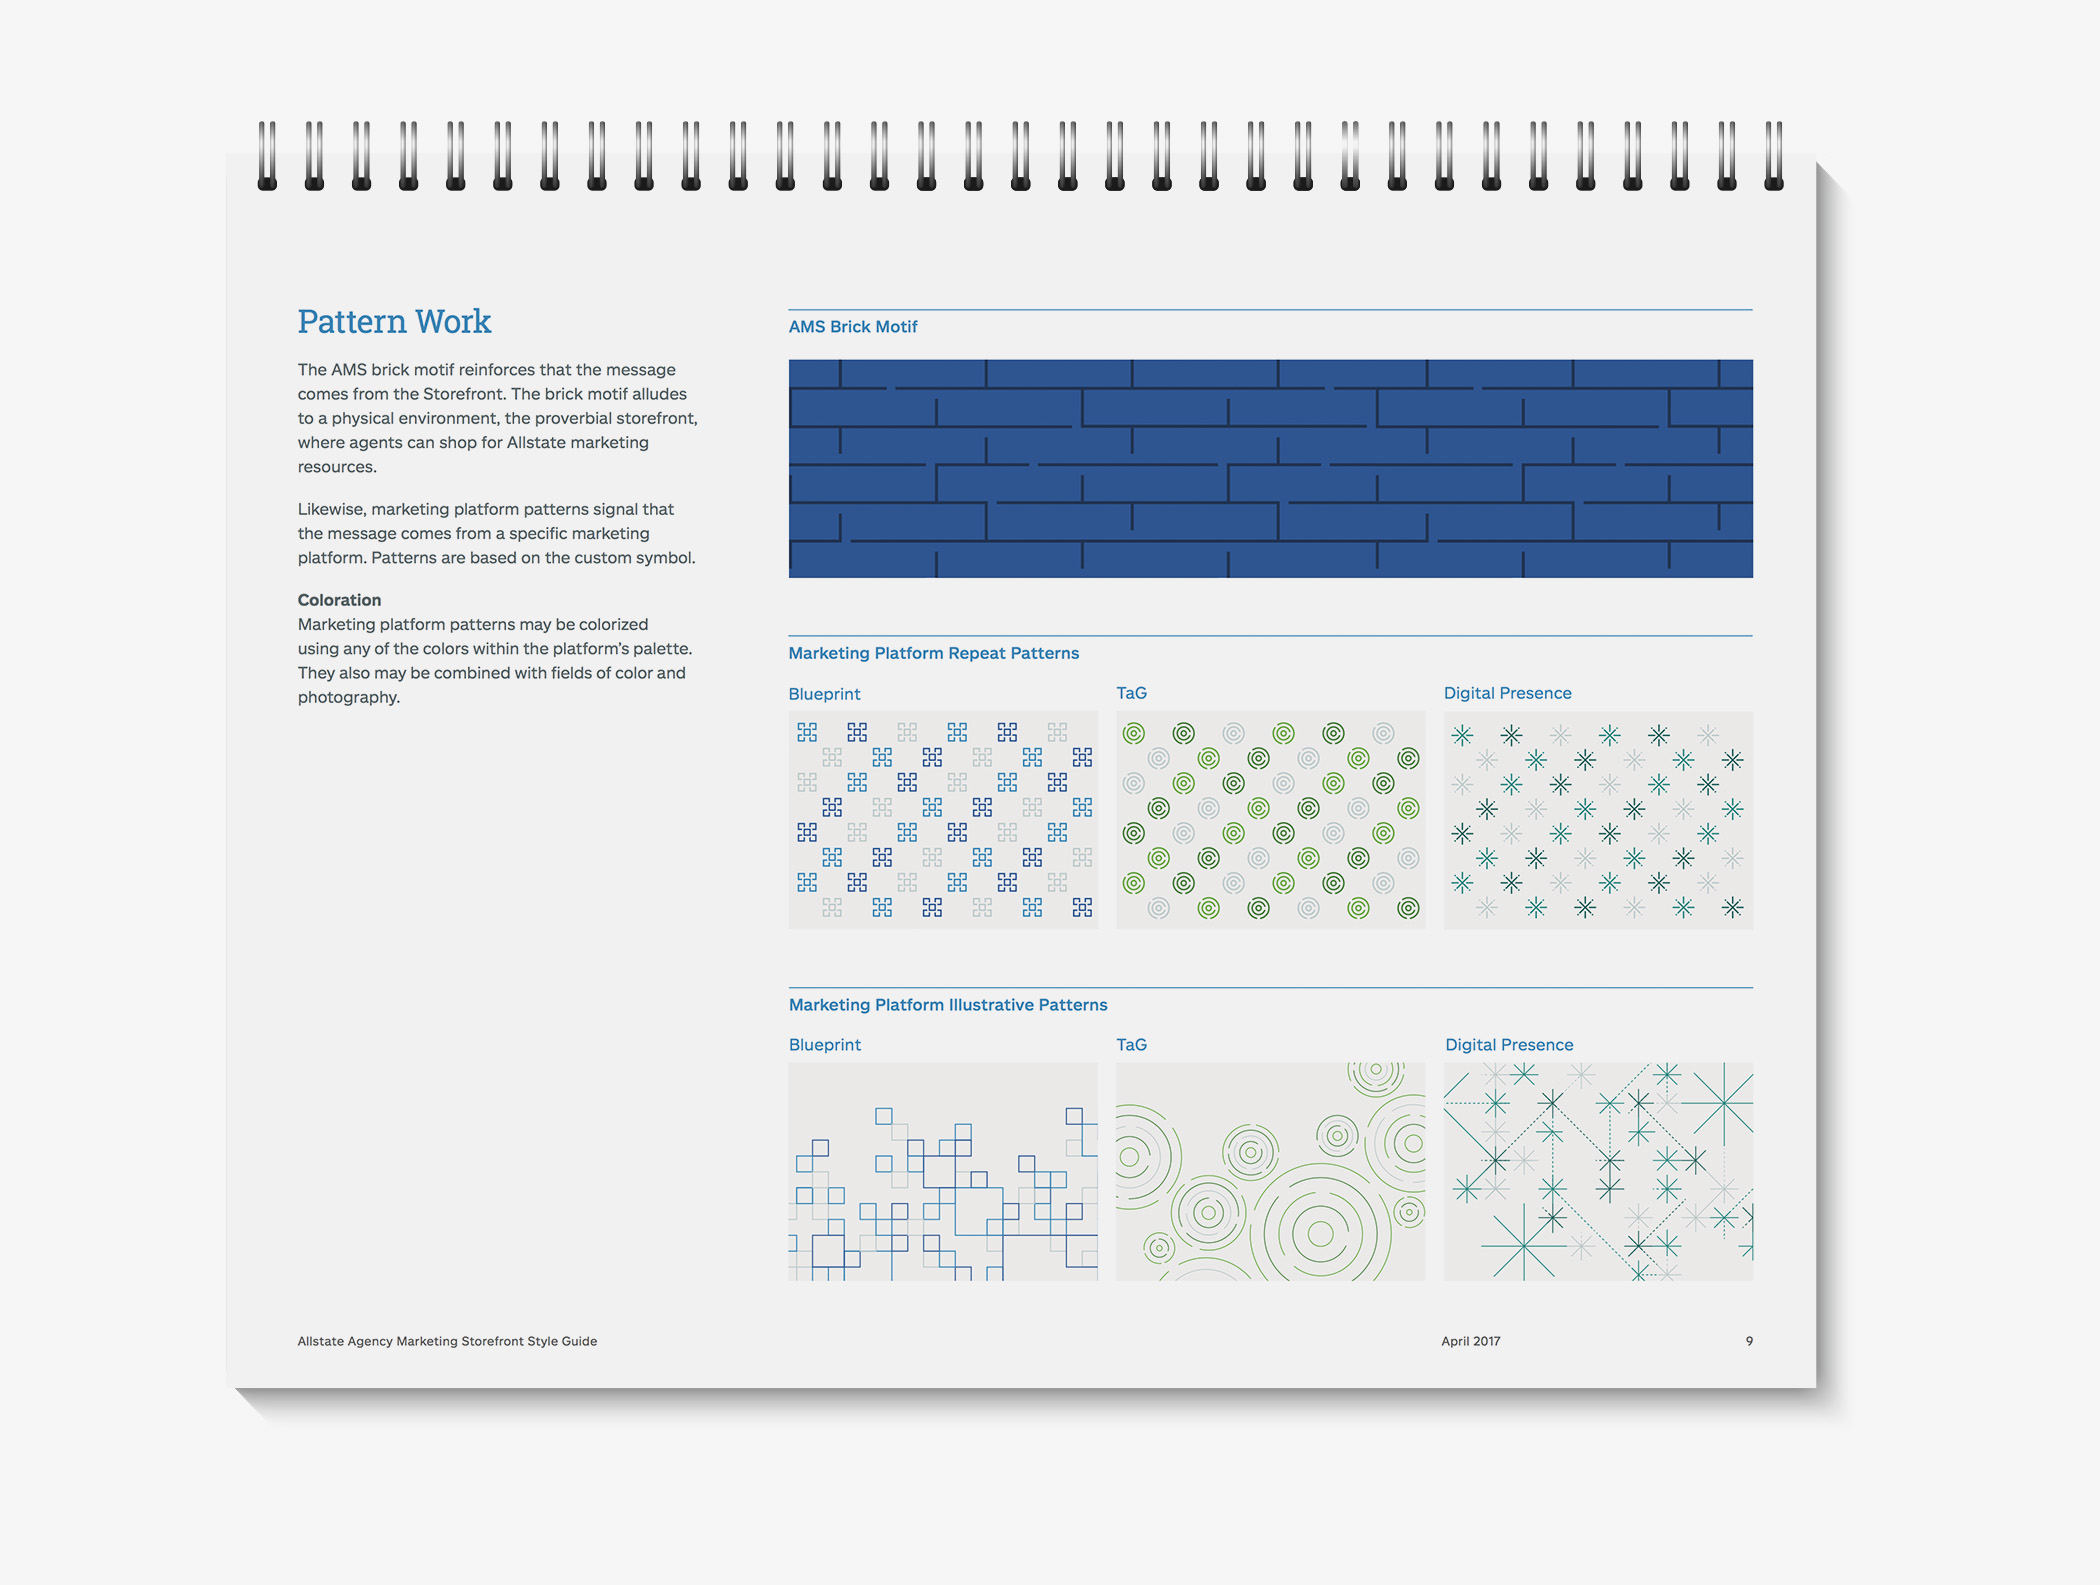 Page from the Allstate Agency Marketing Storefront brand guide showing guidelines for graphical brand pattern usages.